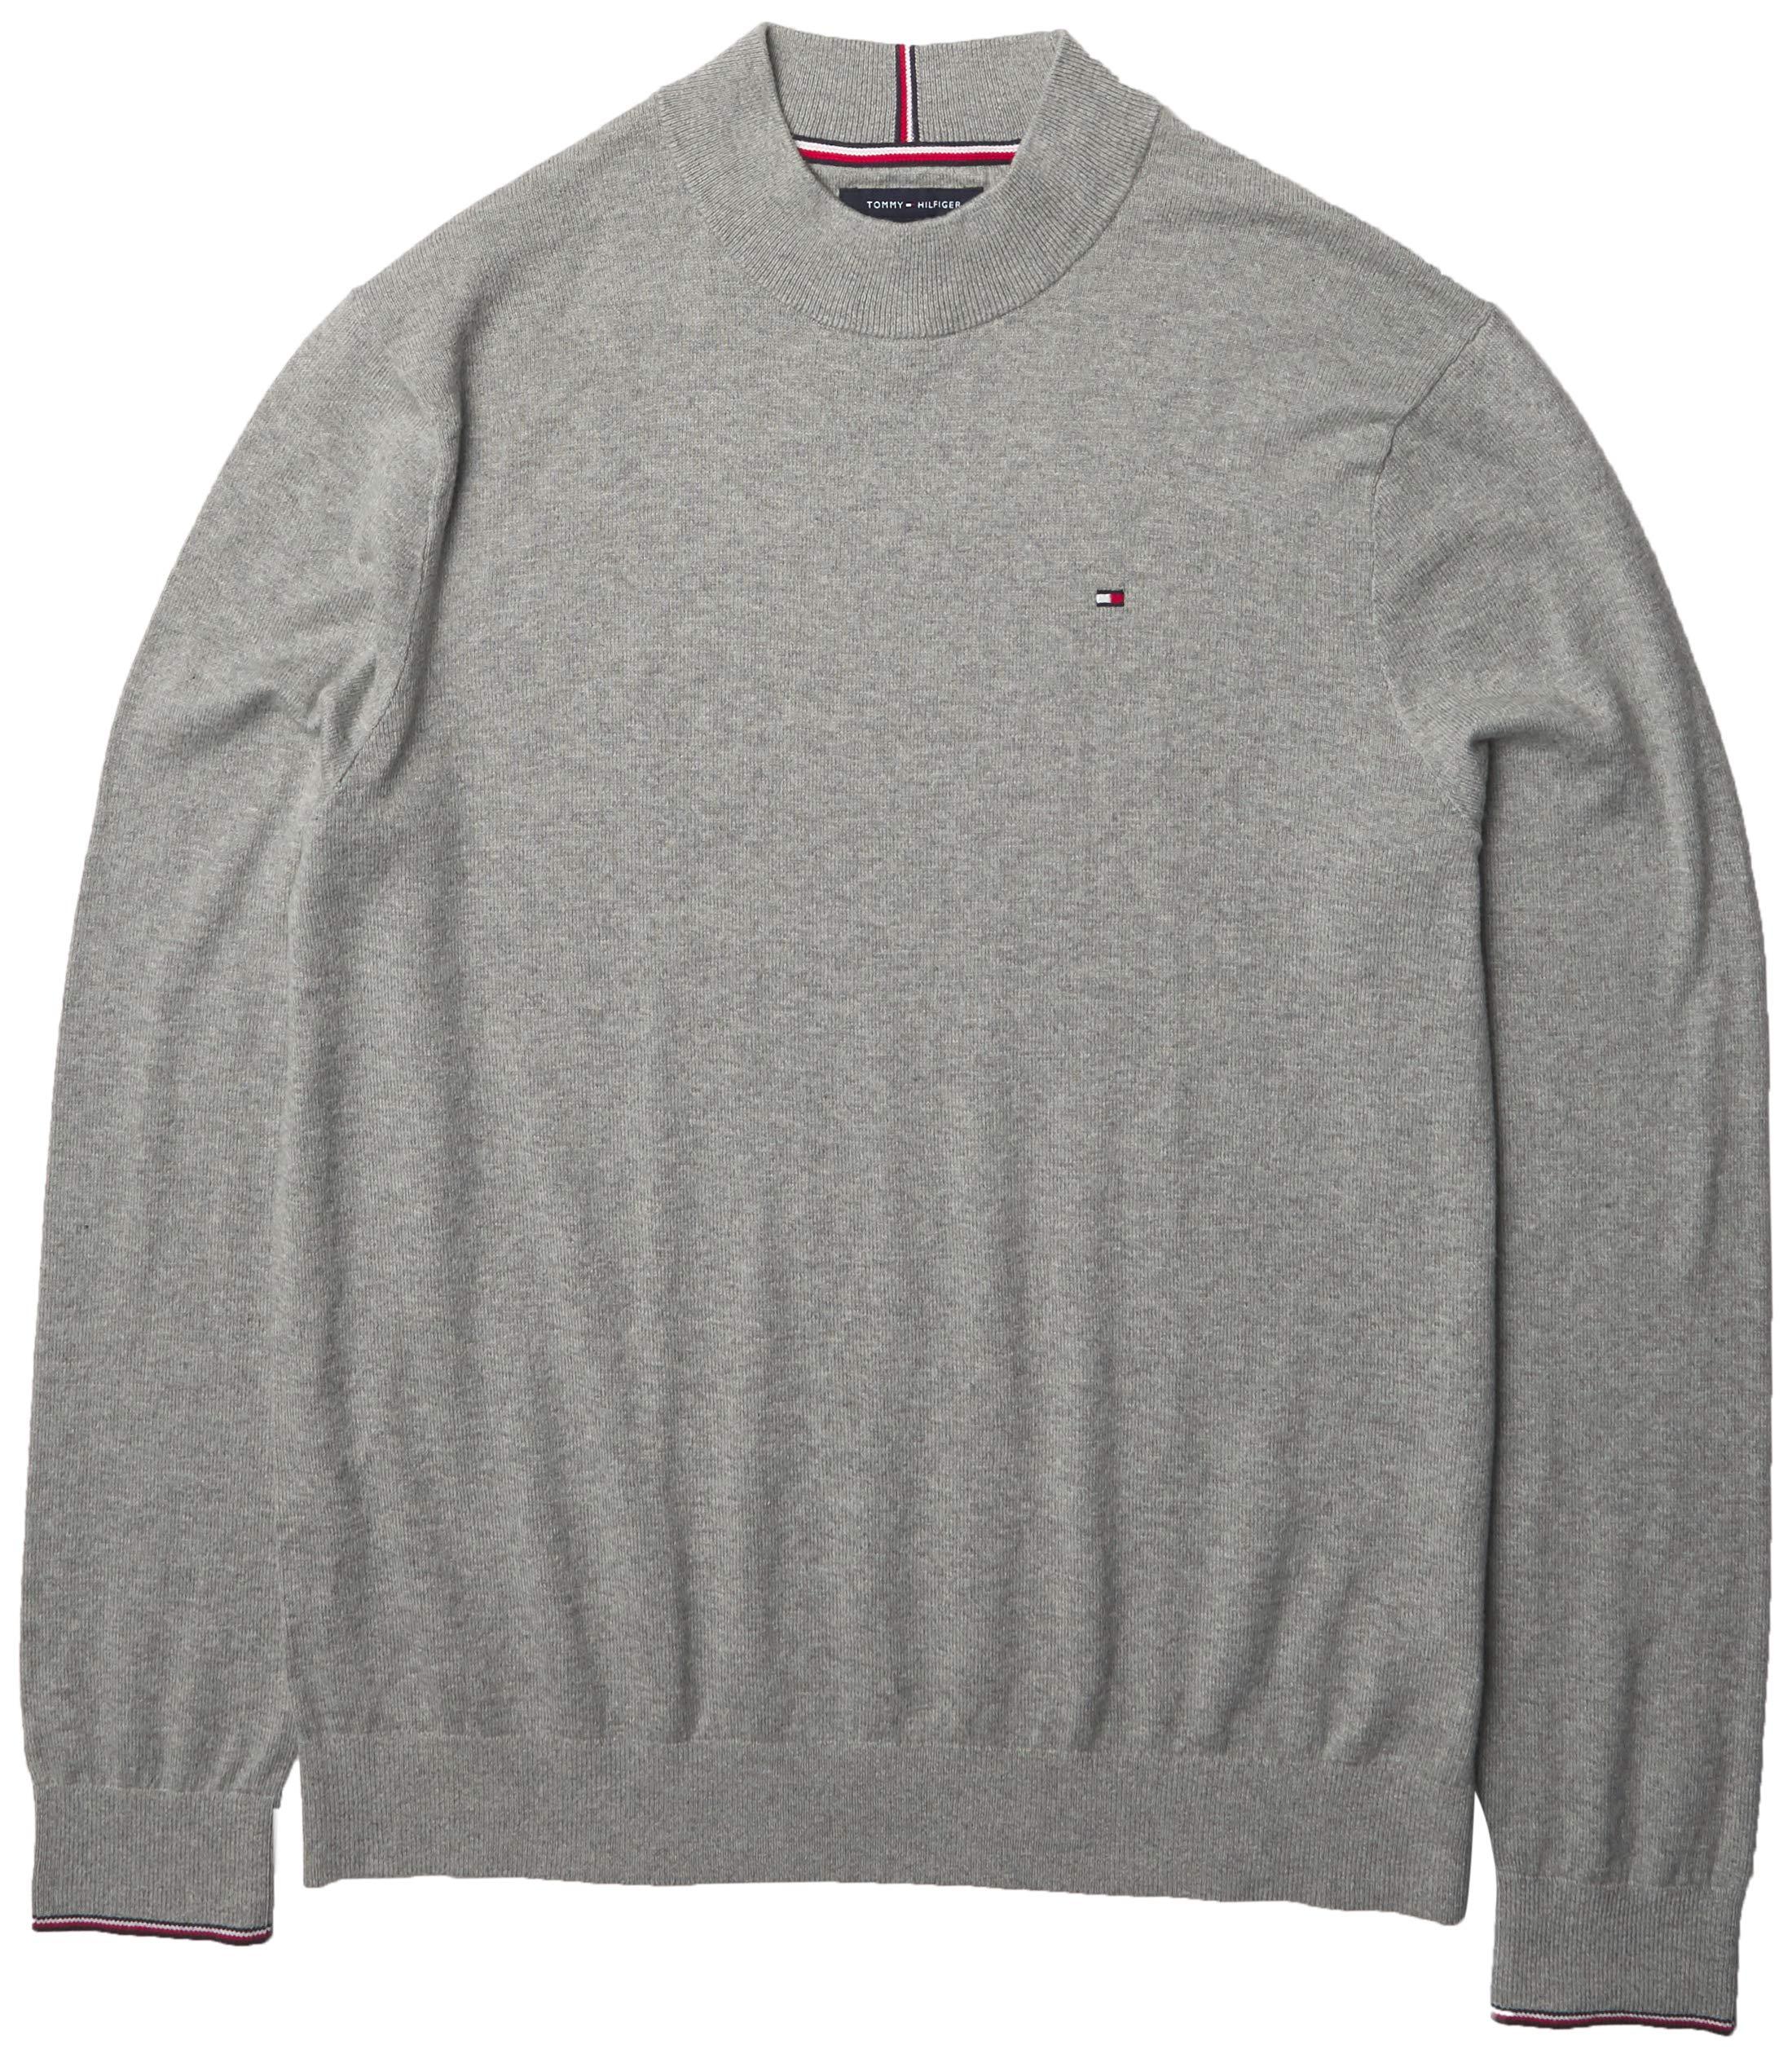 Tommy Hilfiger Solid Crewneck Sweater in Gray for Men - Lyst